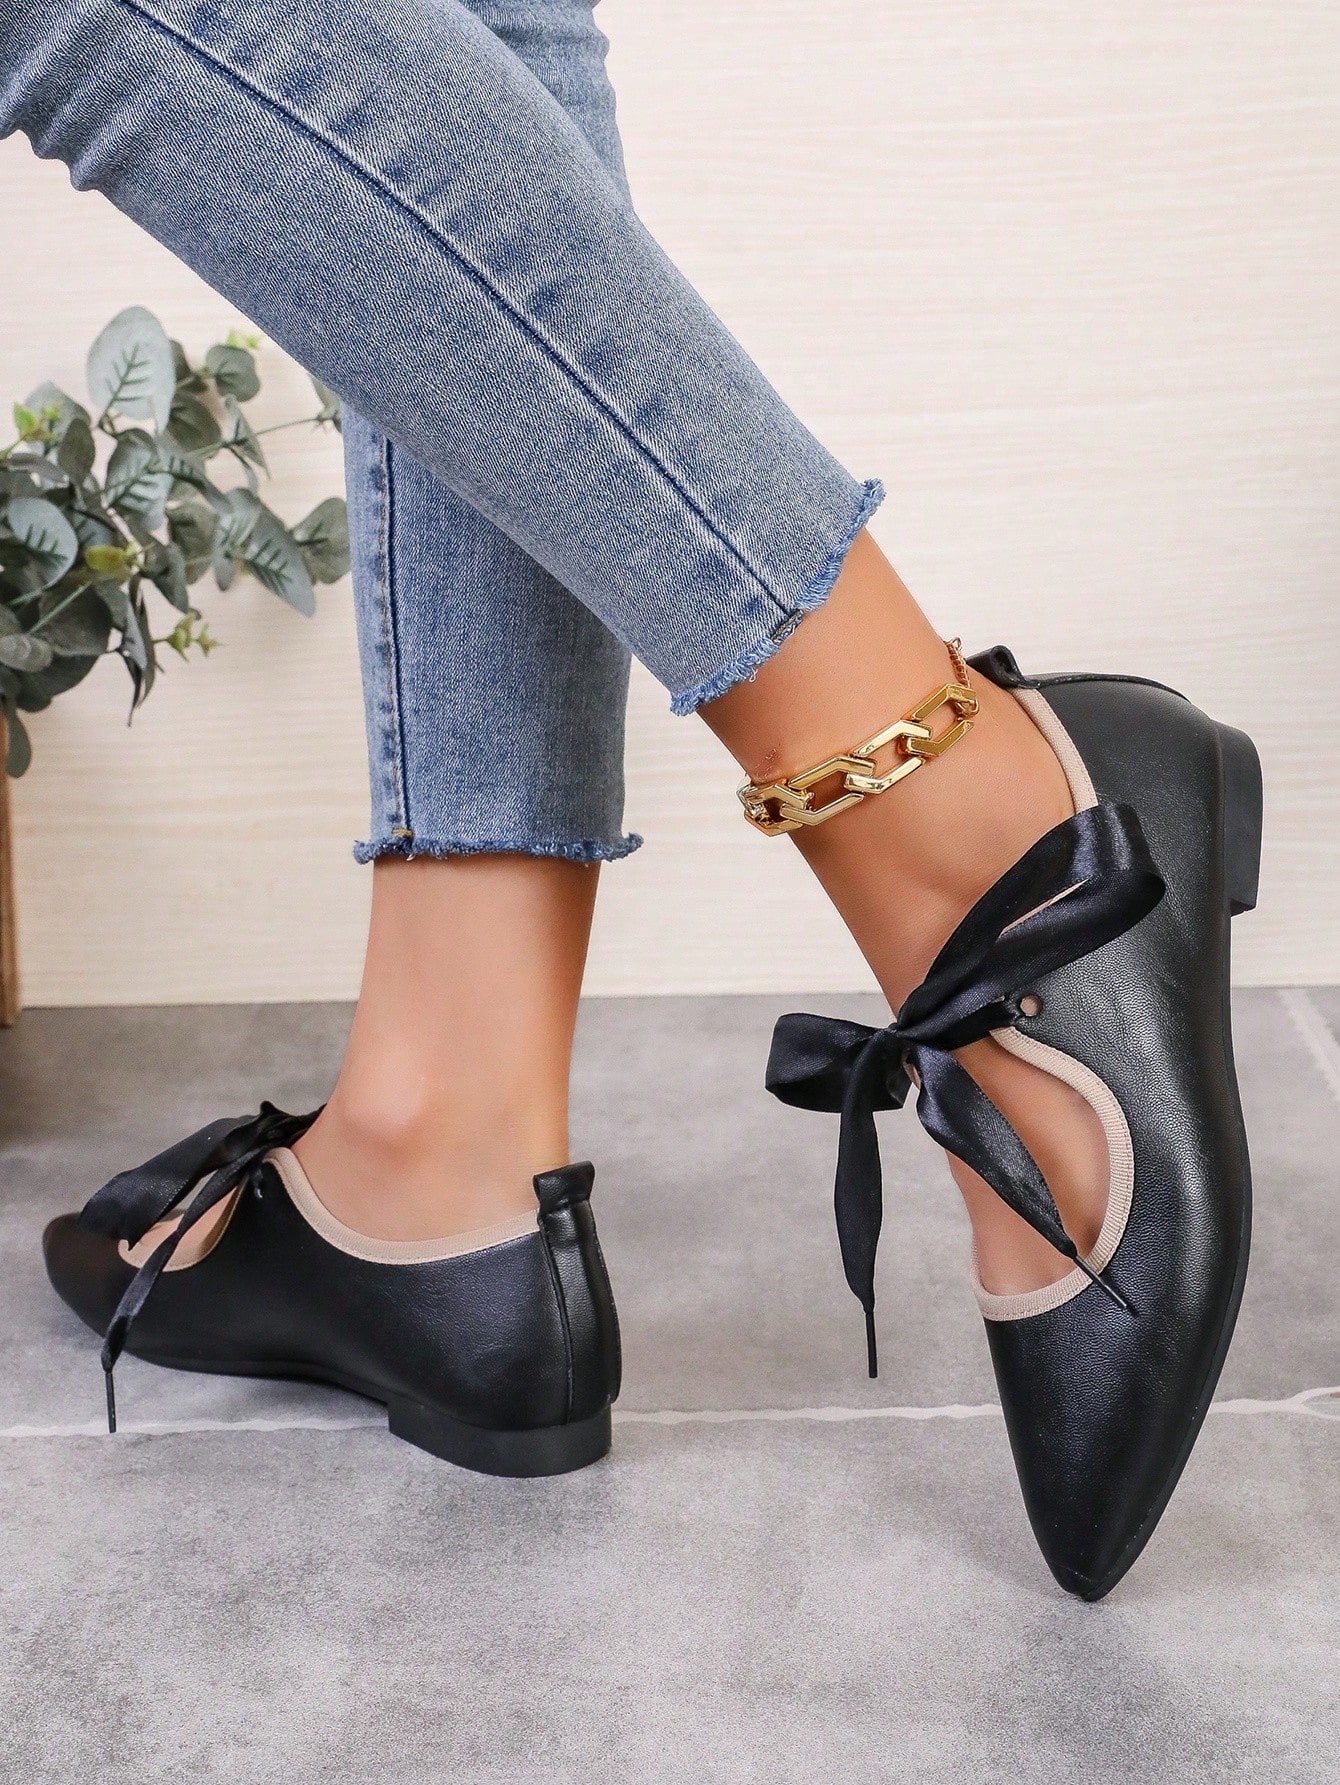 Factory Directly Selling European And American New Women Shoes, Pointed Toe, Comfortable Flat Mary Jane Shoes, French Vintage Style, Elegant Strap Women's Leather Shoes